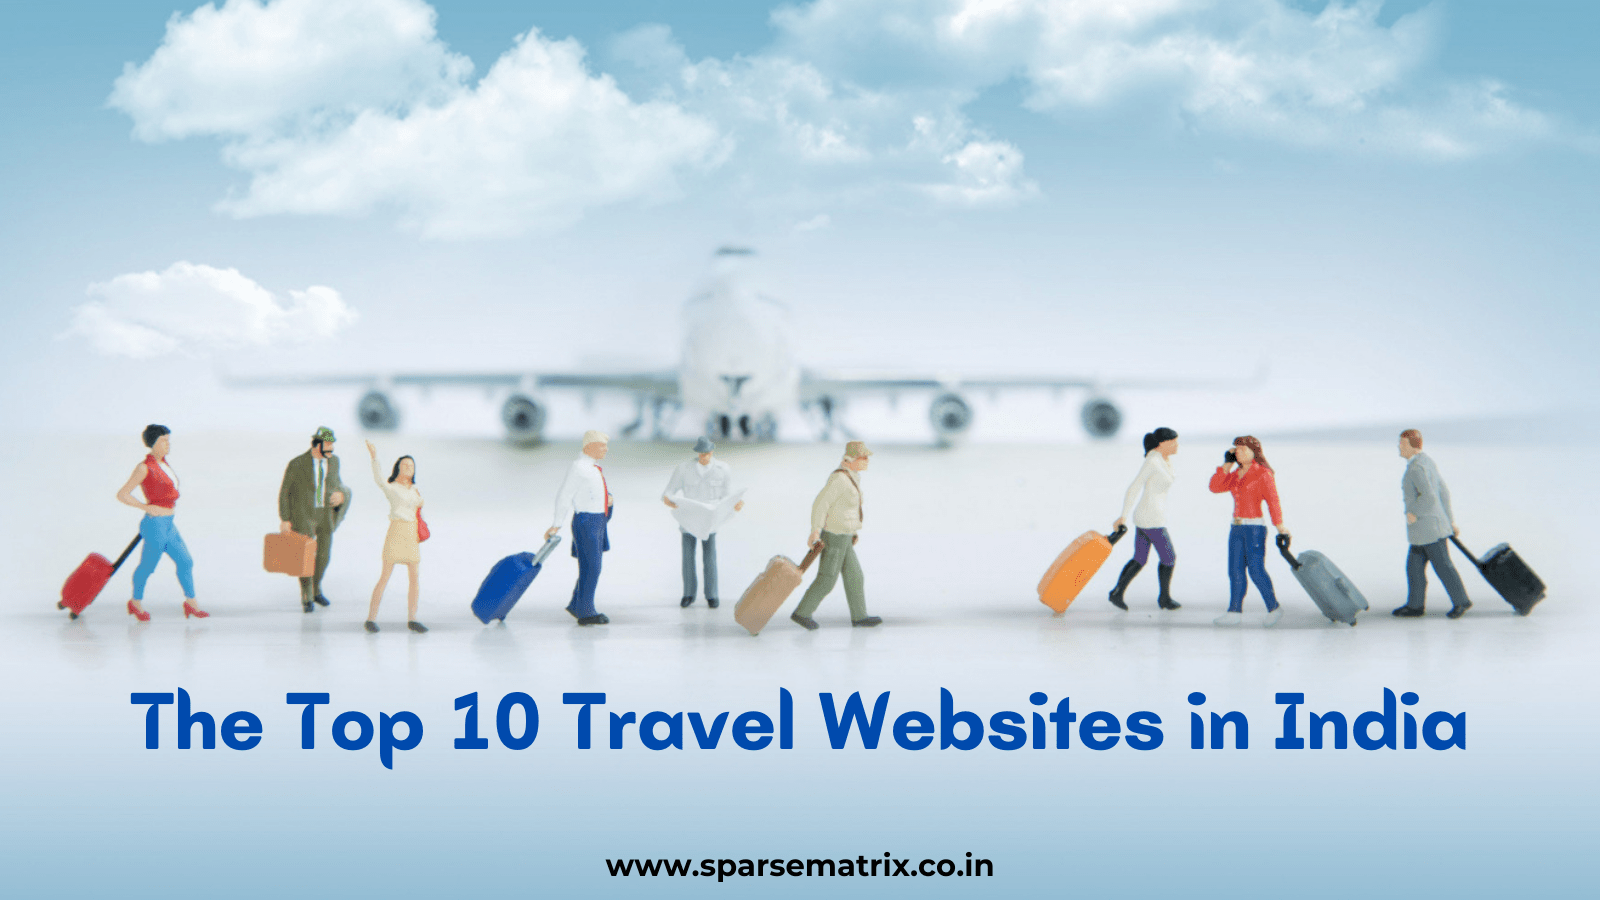 The Top 10 Travel Websites in India